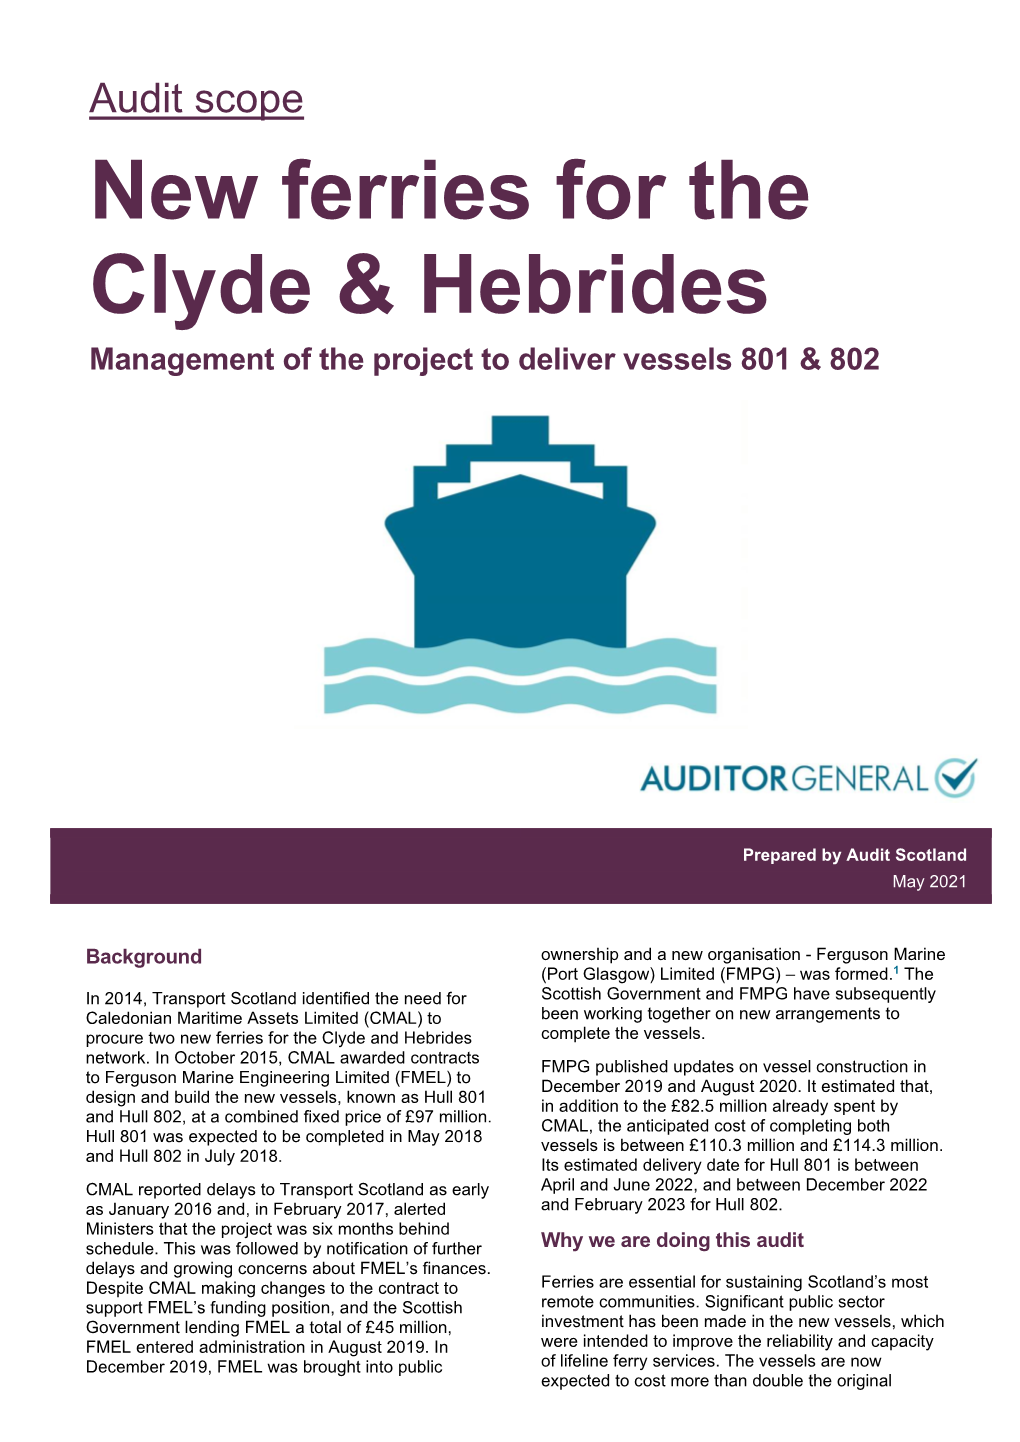 Audit Scope New Ferries for the Clyde & Hebrides Management of the Project to Deliver Vessels 801 & 802